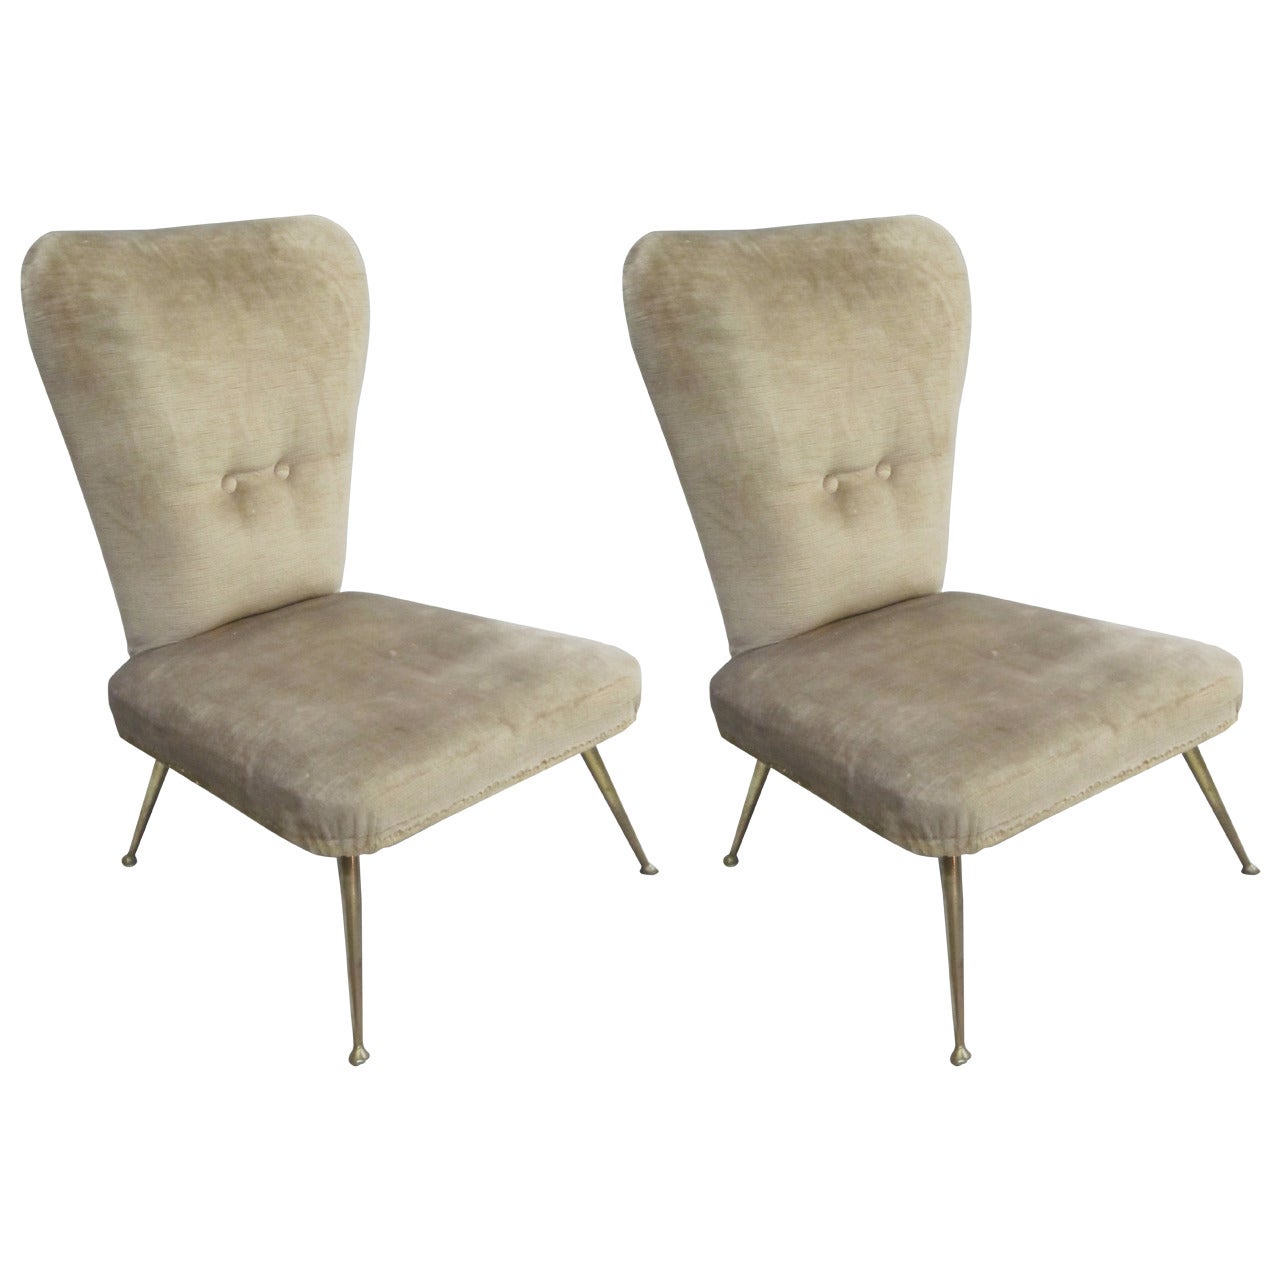 Pair of Mid-Century Modern Slipper or Lounge Chairs Attributed to Marco Zanuso For Sale